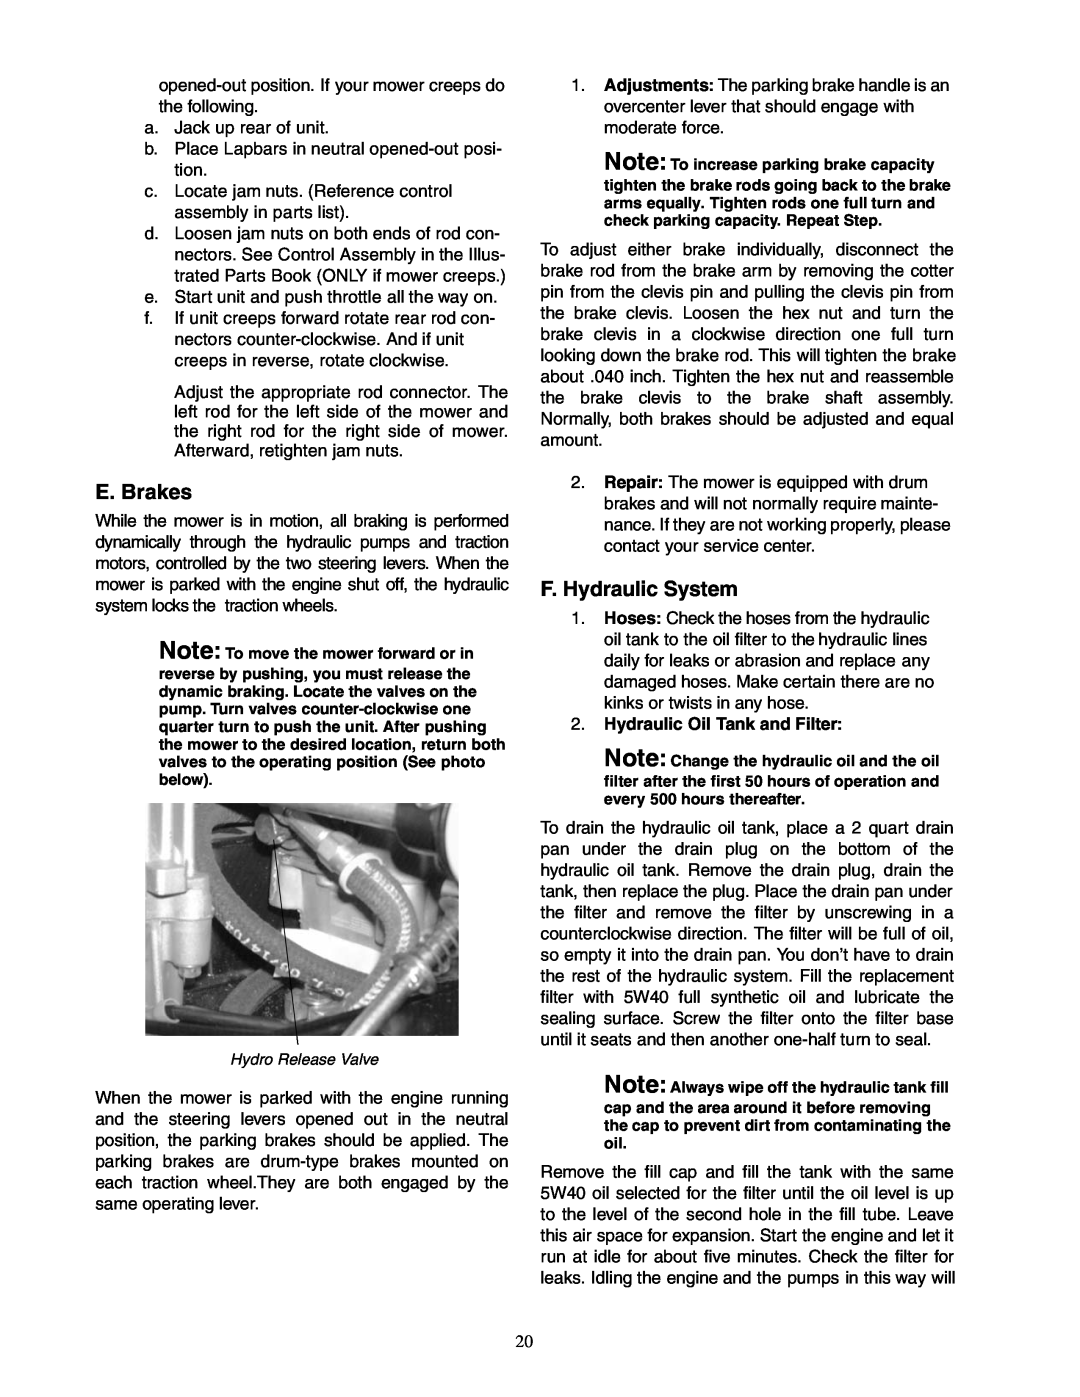 Cub Cadet Z - Wing 48 service manual E. Brakes, F.Hydraulic System, Hydraulic Oil Tank and Filter 